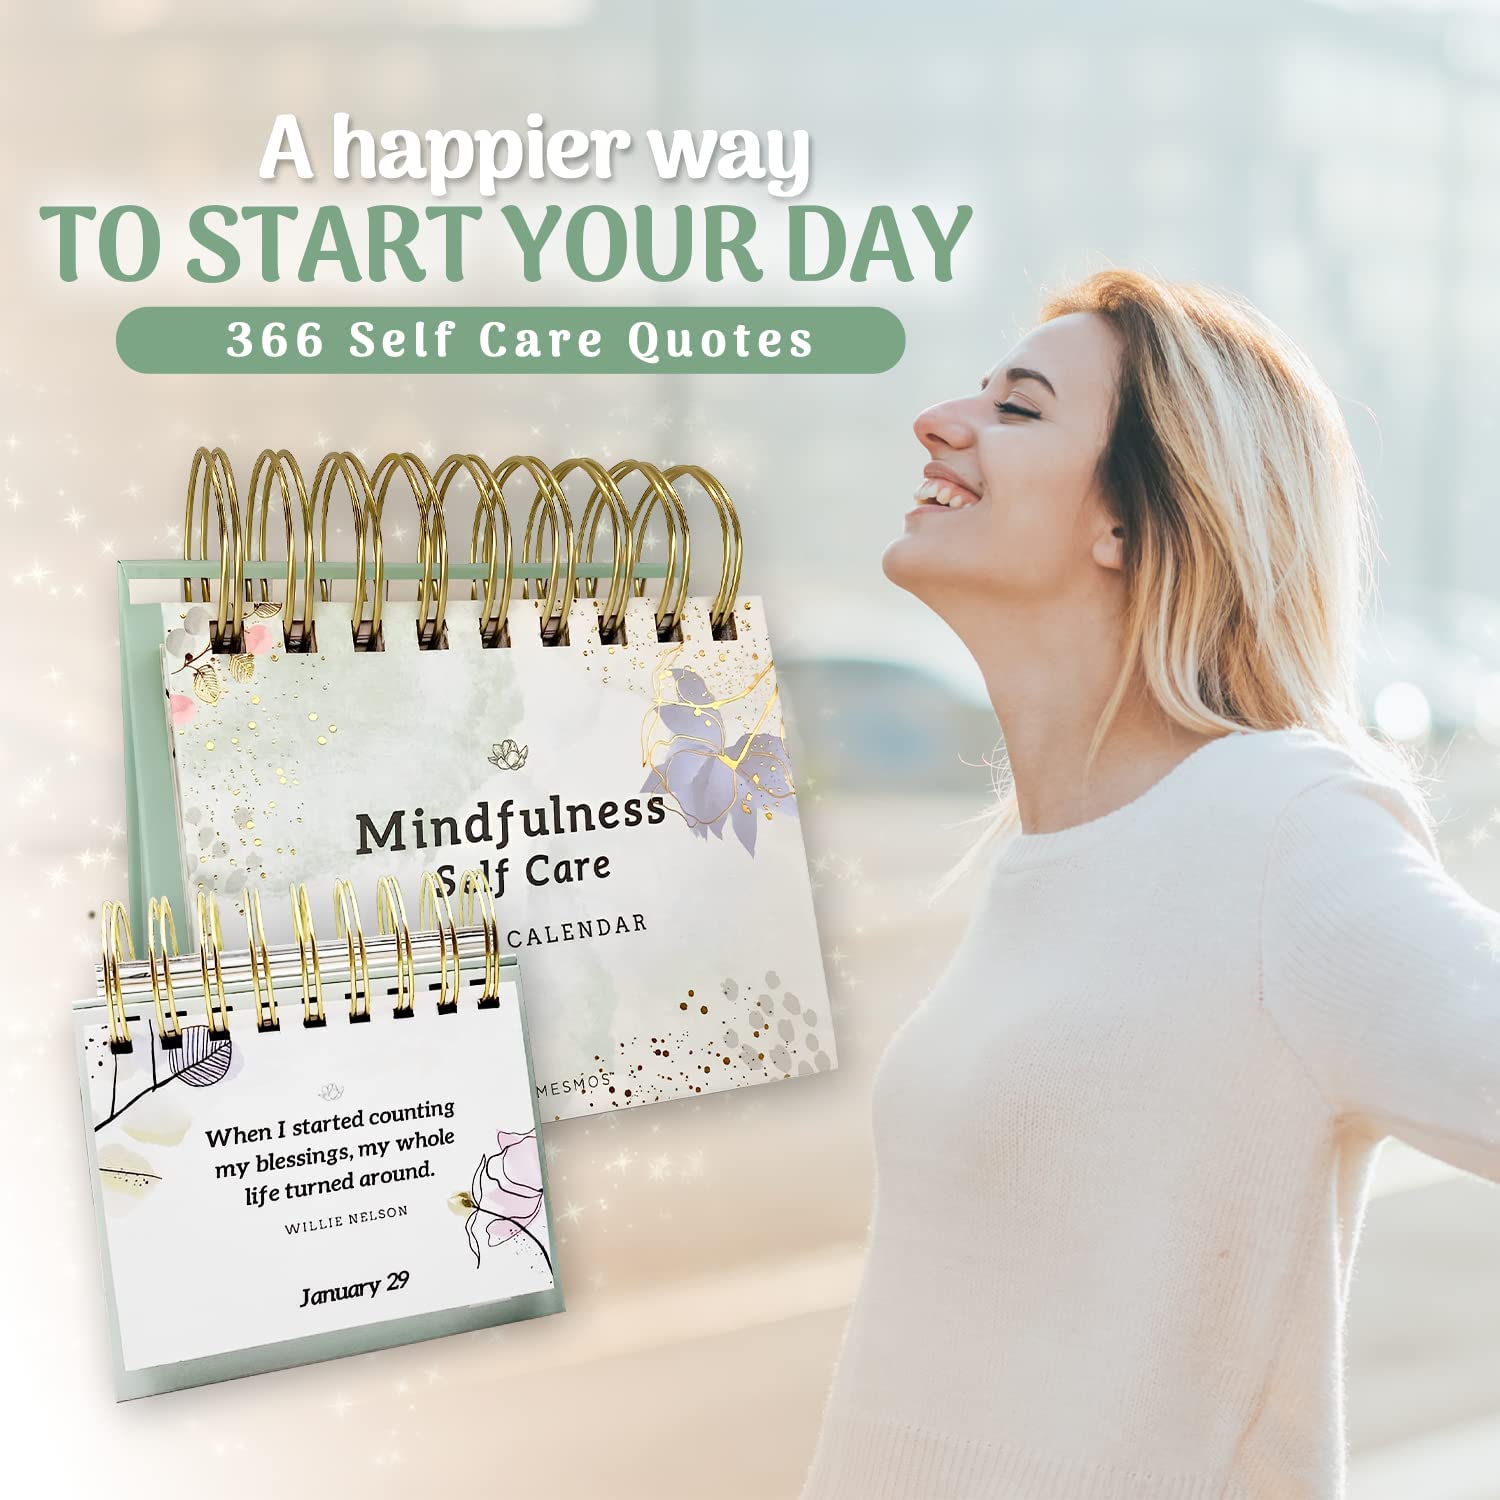 a happier way to start your day - mindfulness calendar stress relief